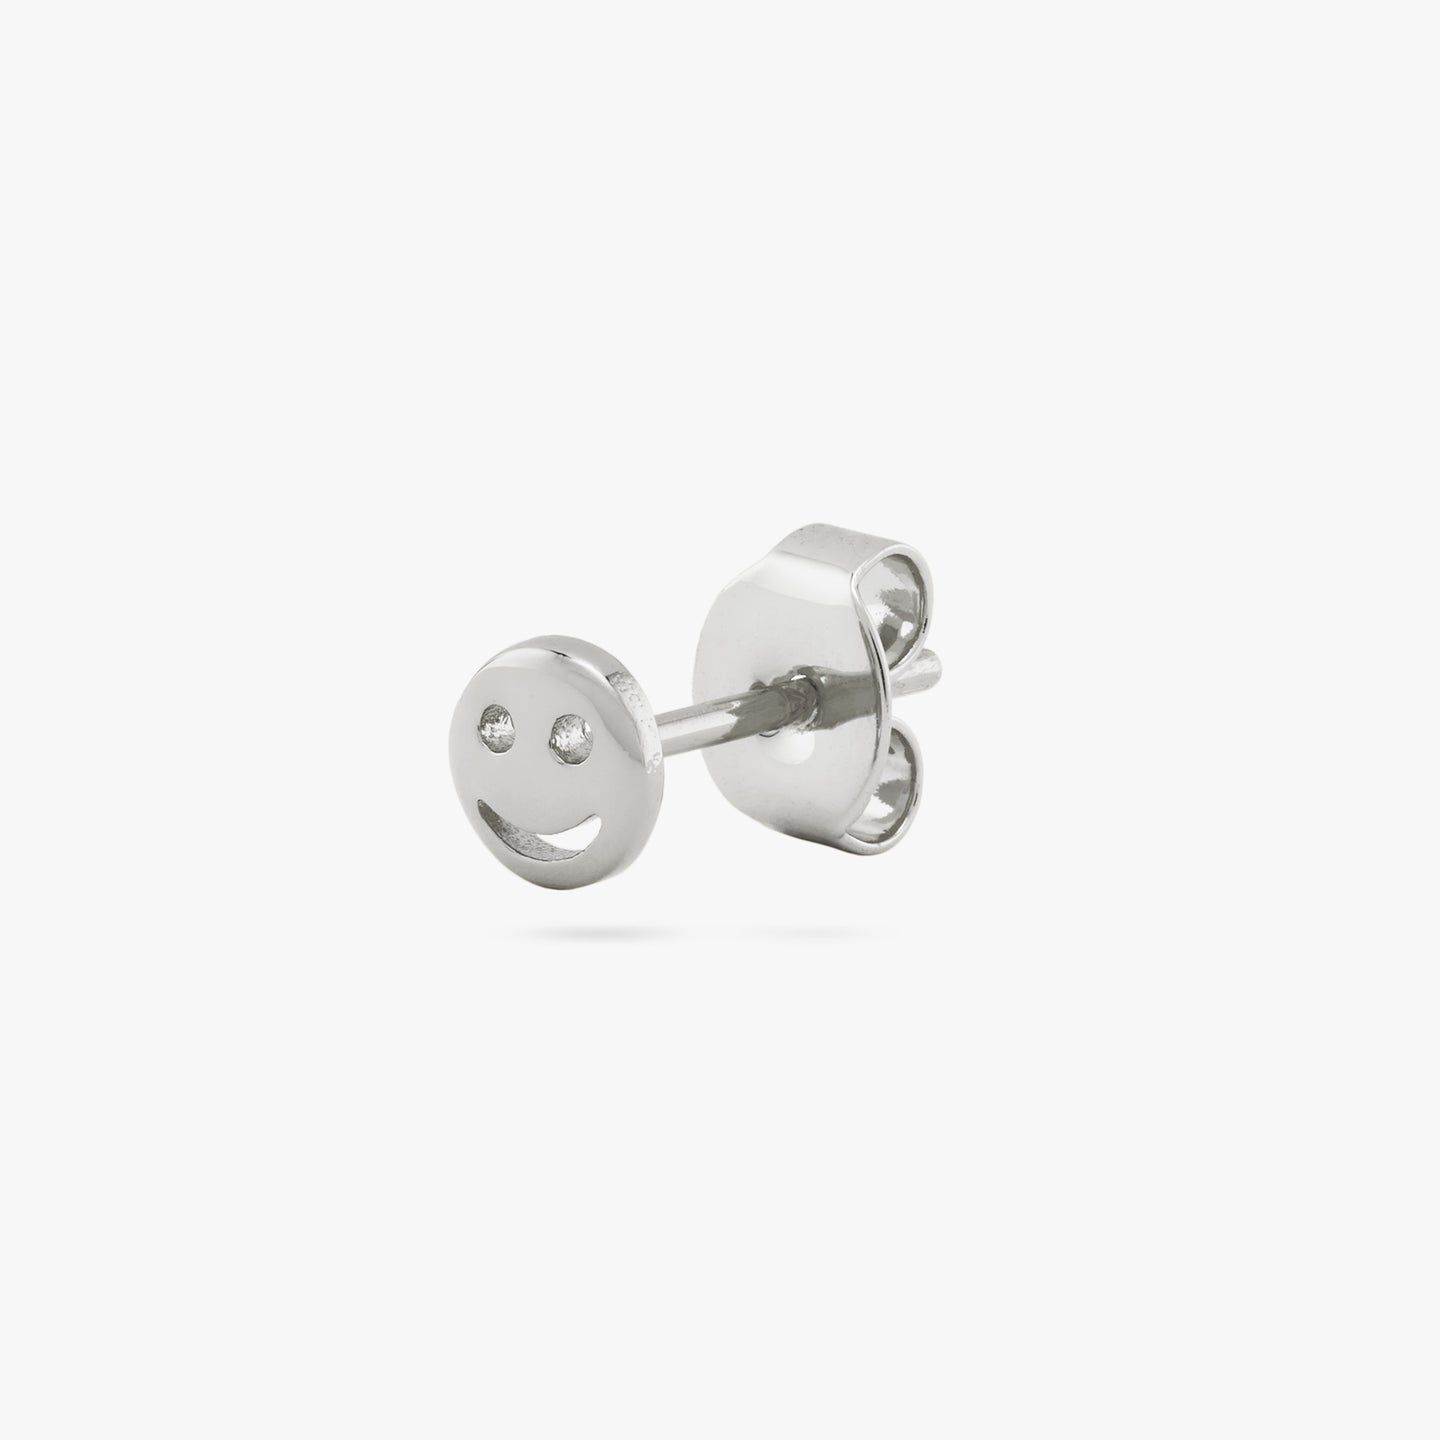 This is a small silver smiley face stud color:null|silver